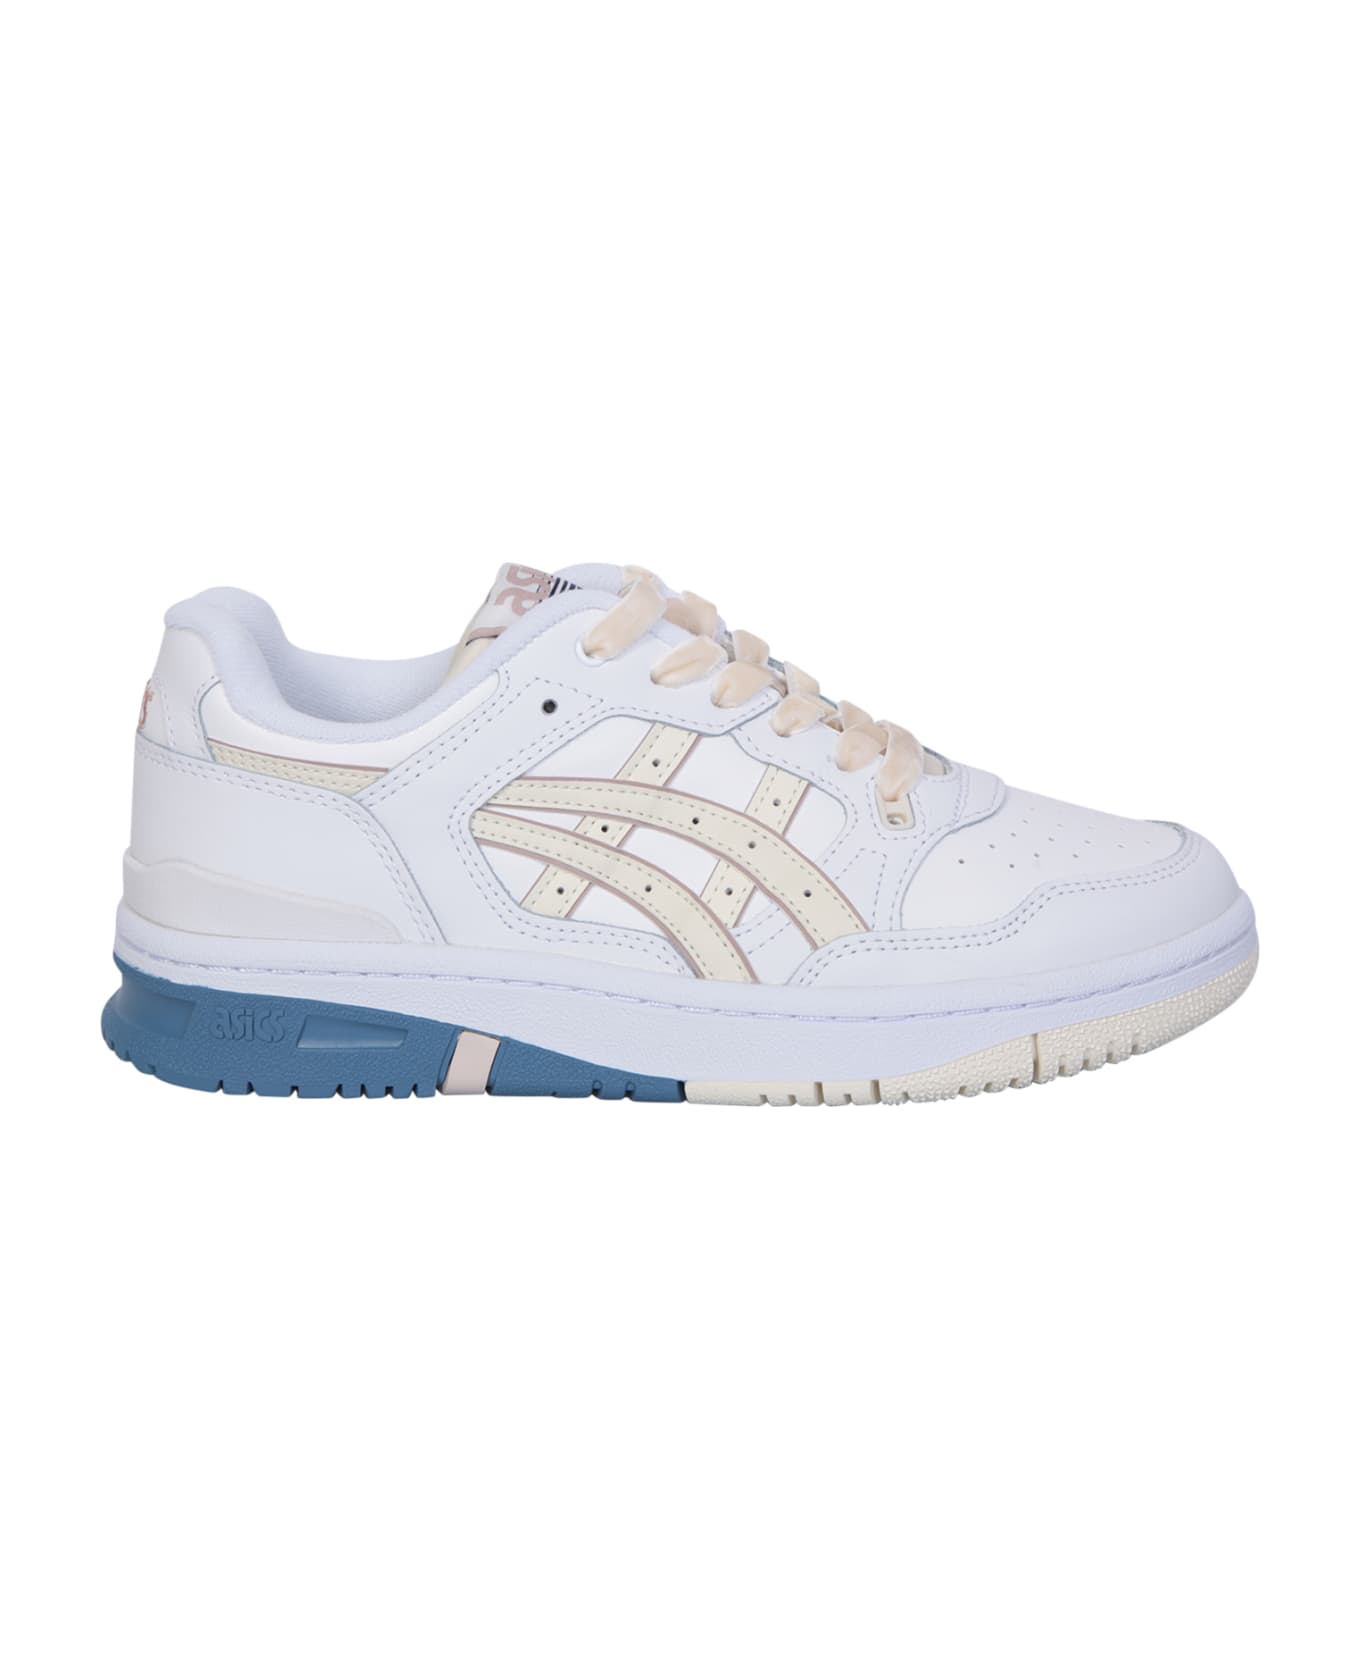 Asics White And Beige Ex89 Sneakers - White